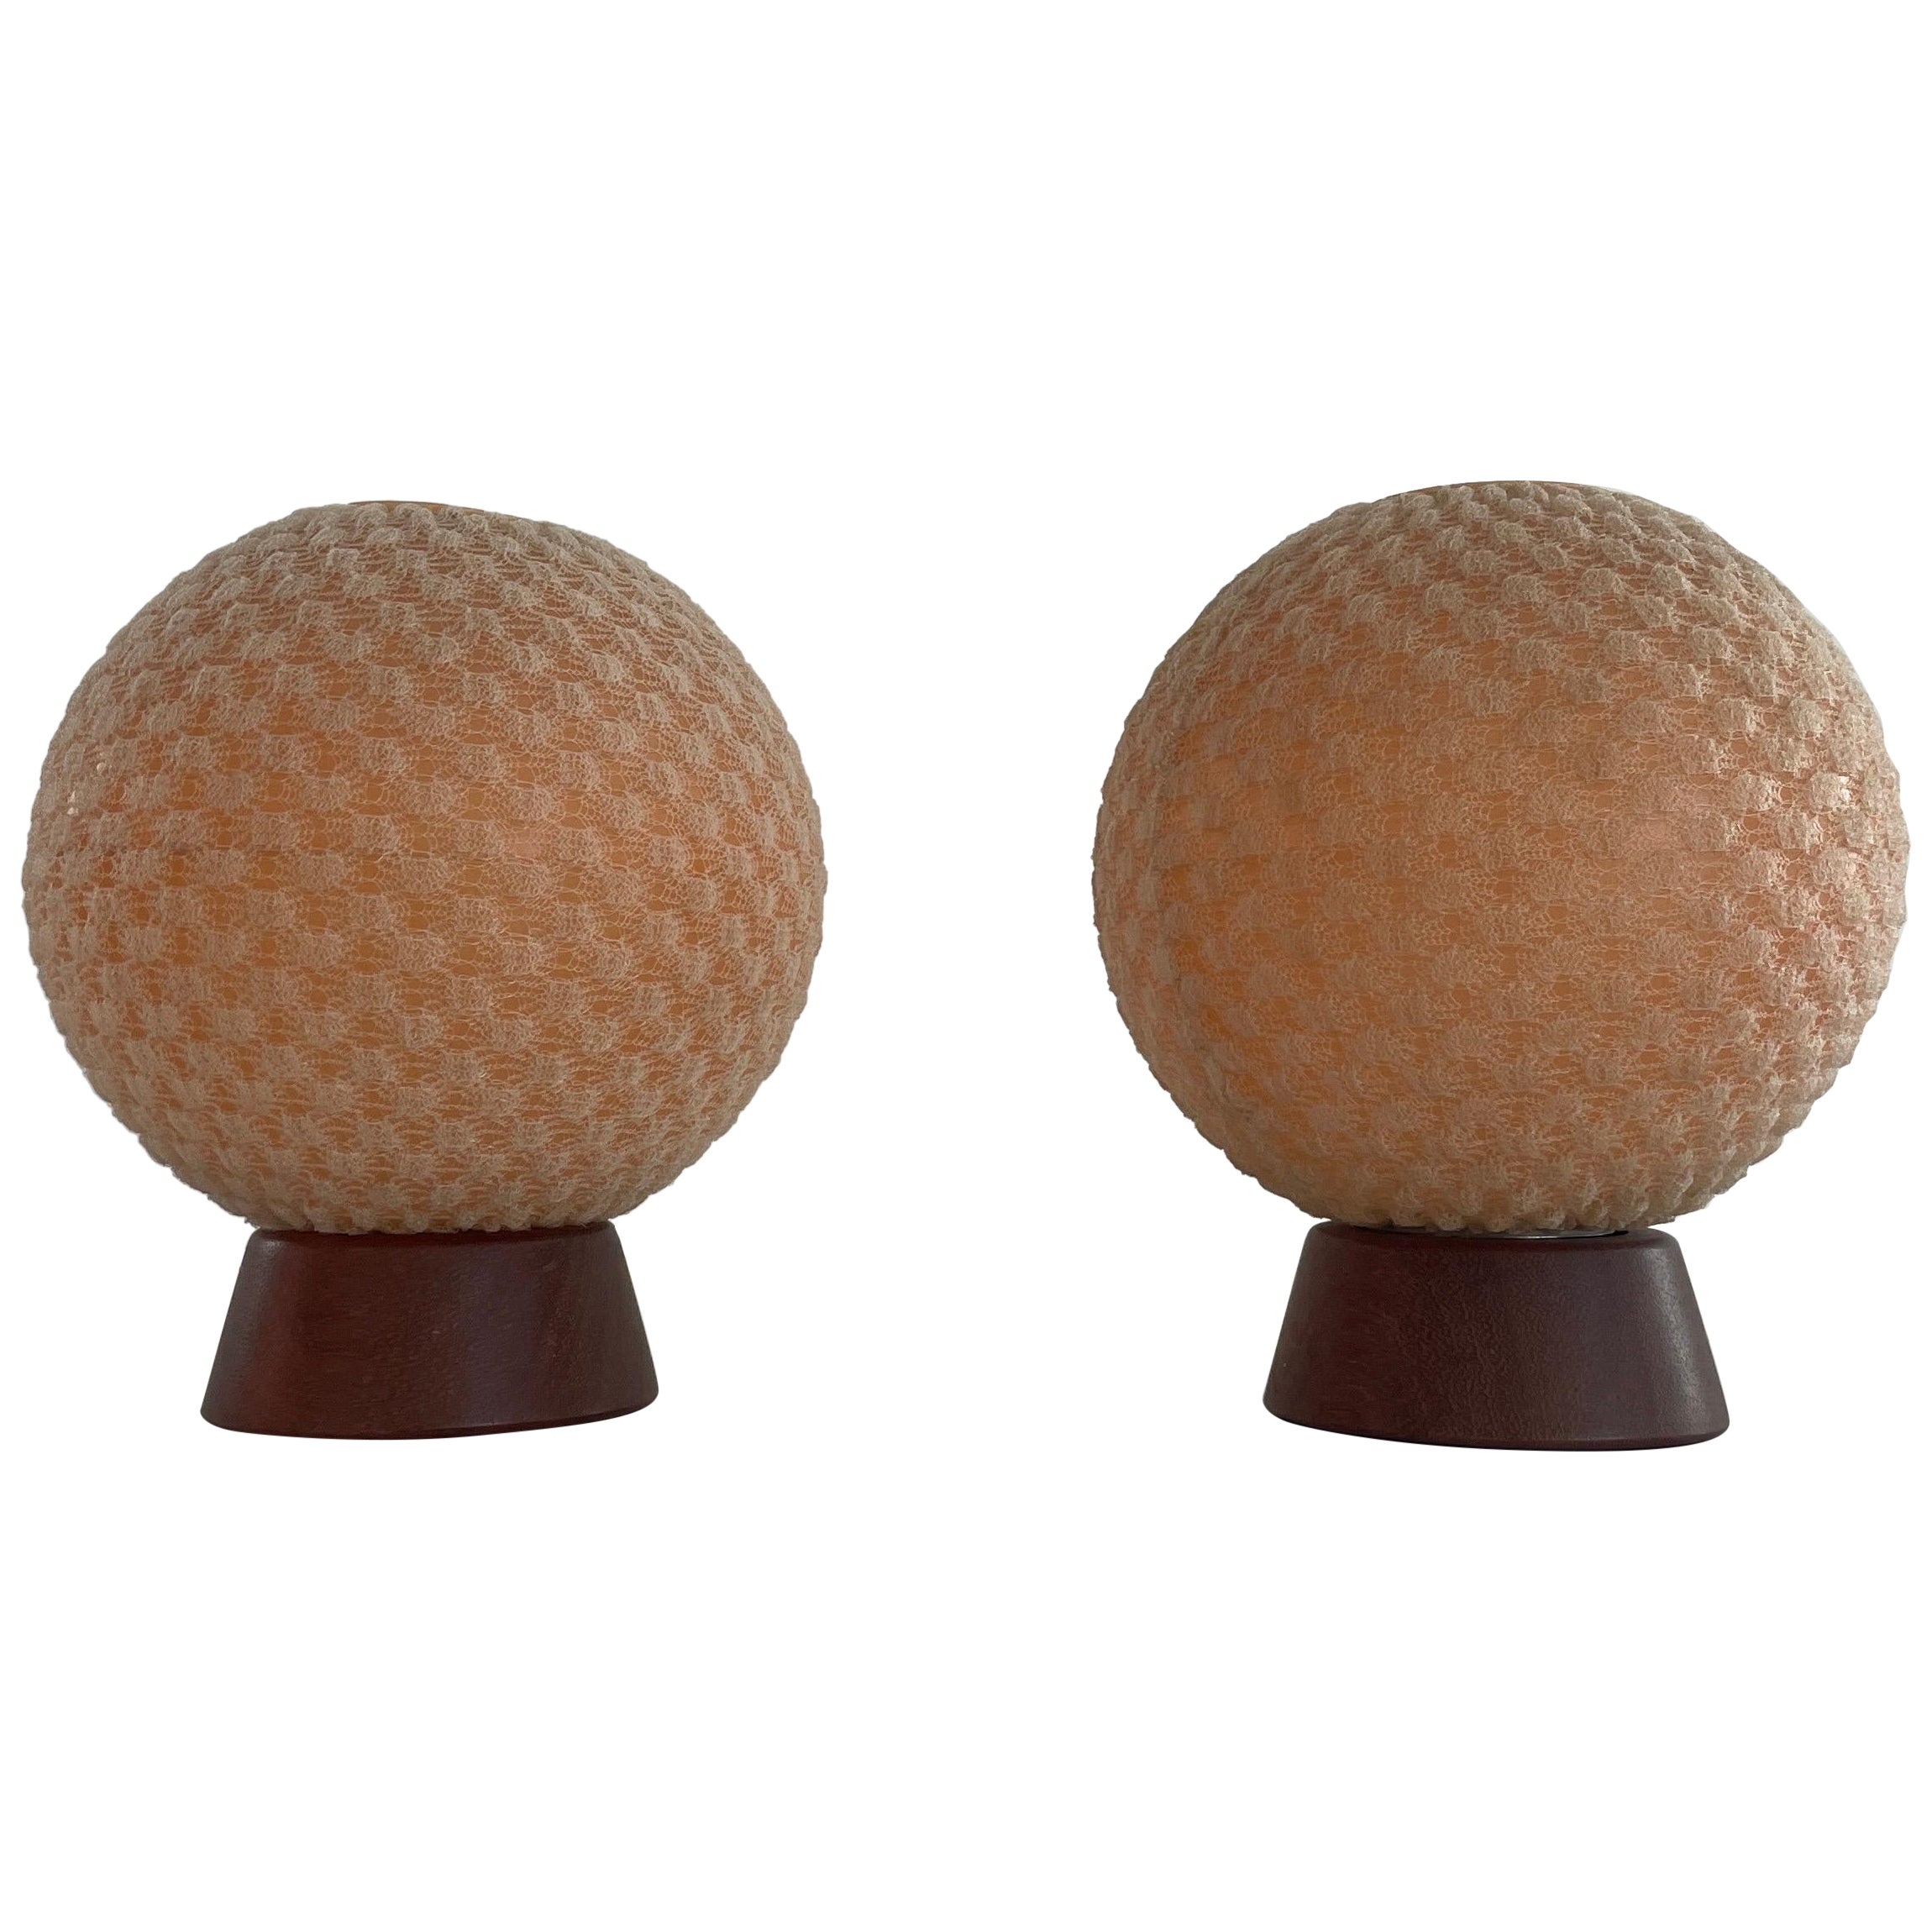 Teak & Ball Fabric Shade Pair of Bedside Lamps by Temde, 1960s Germany For Sale